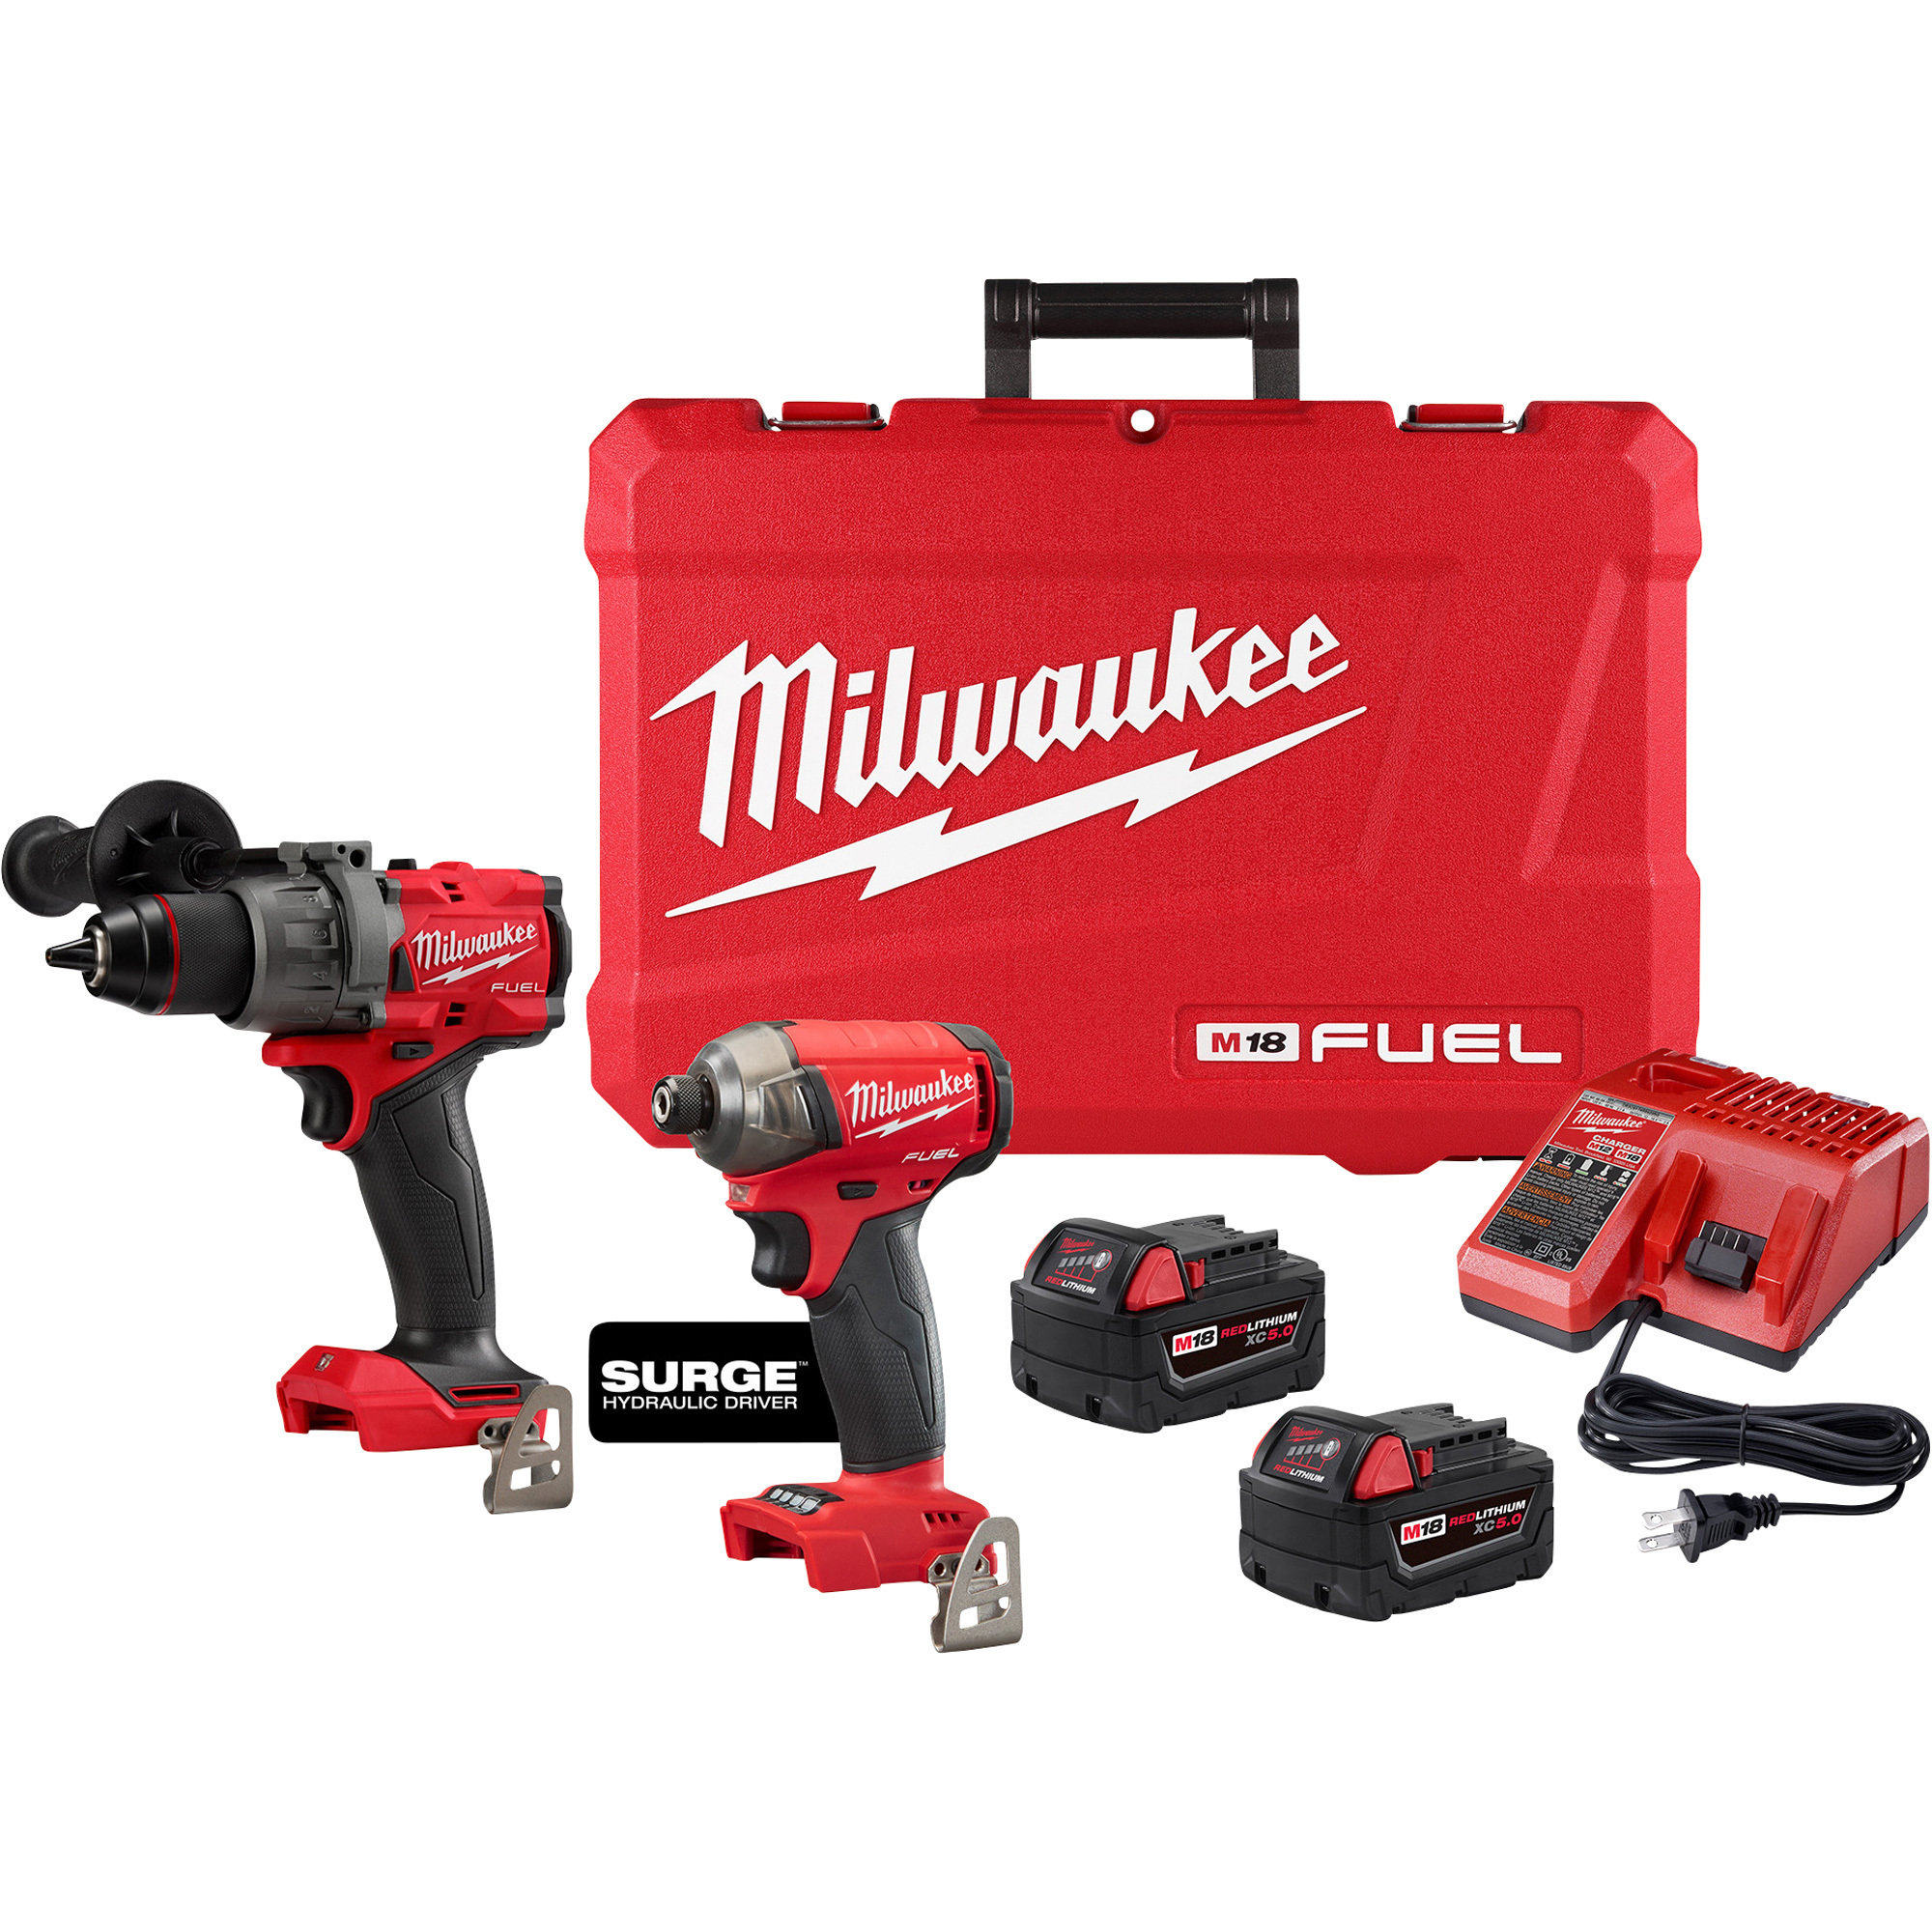 Milwaukee M18 FUEL 2-Tool Brushless Combo Kit, 1/2Inch Hammer Drill, 1/4Inch Hex Hydraulic Driver, 2 Batteries, Charger, Model 3699-22